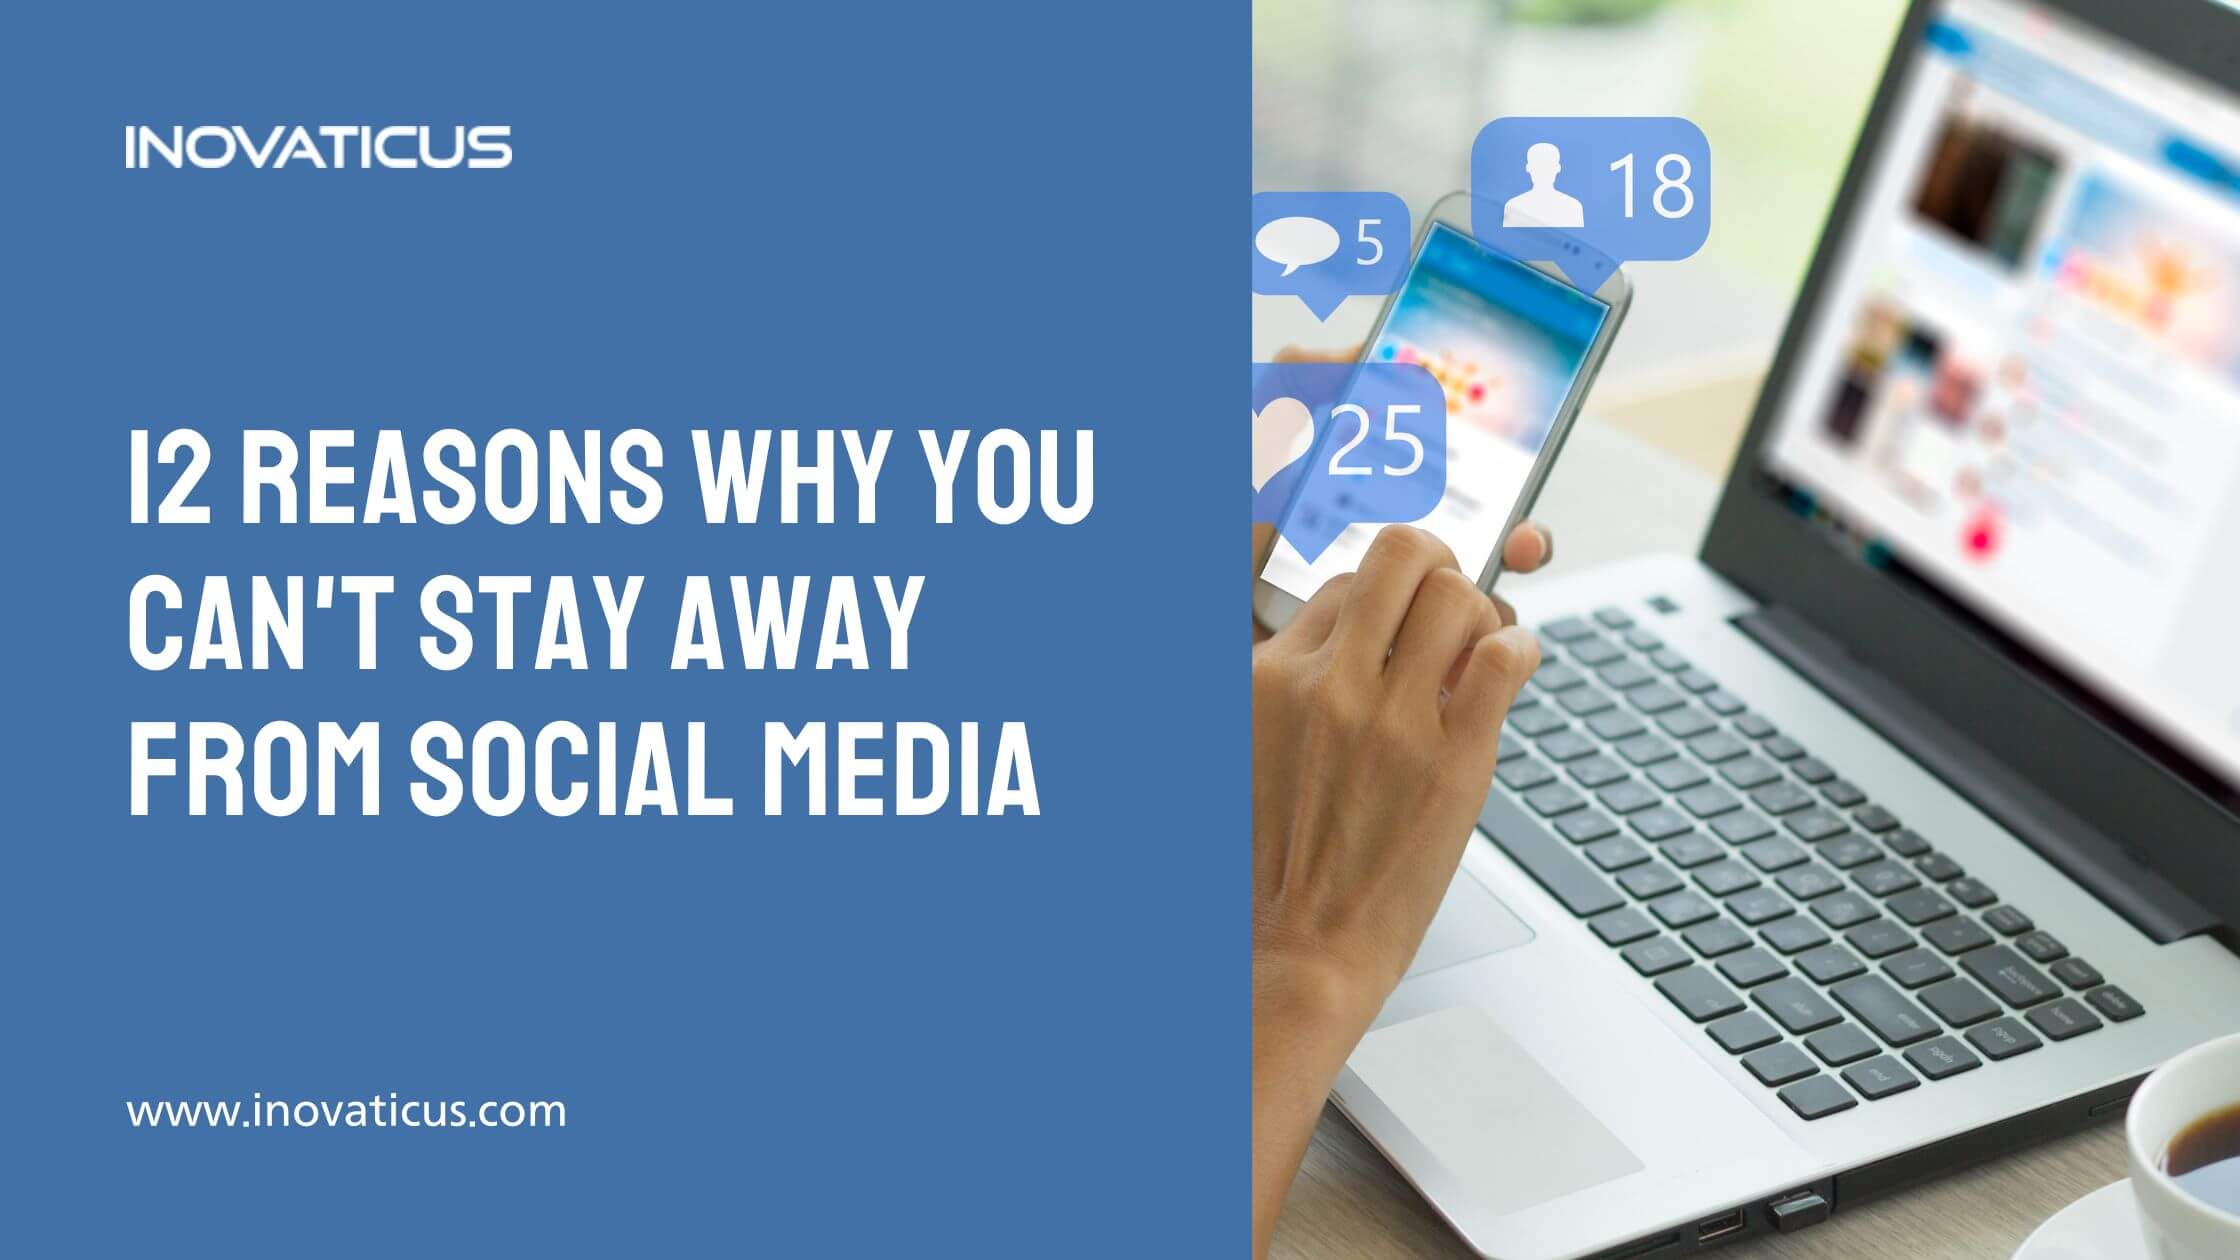 12 Reasons Why You Can’t Stay Away From Social Media